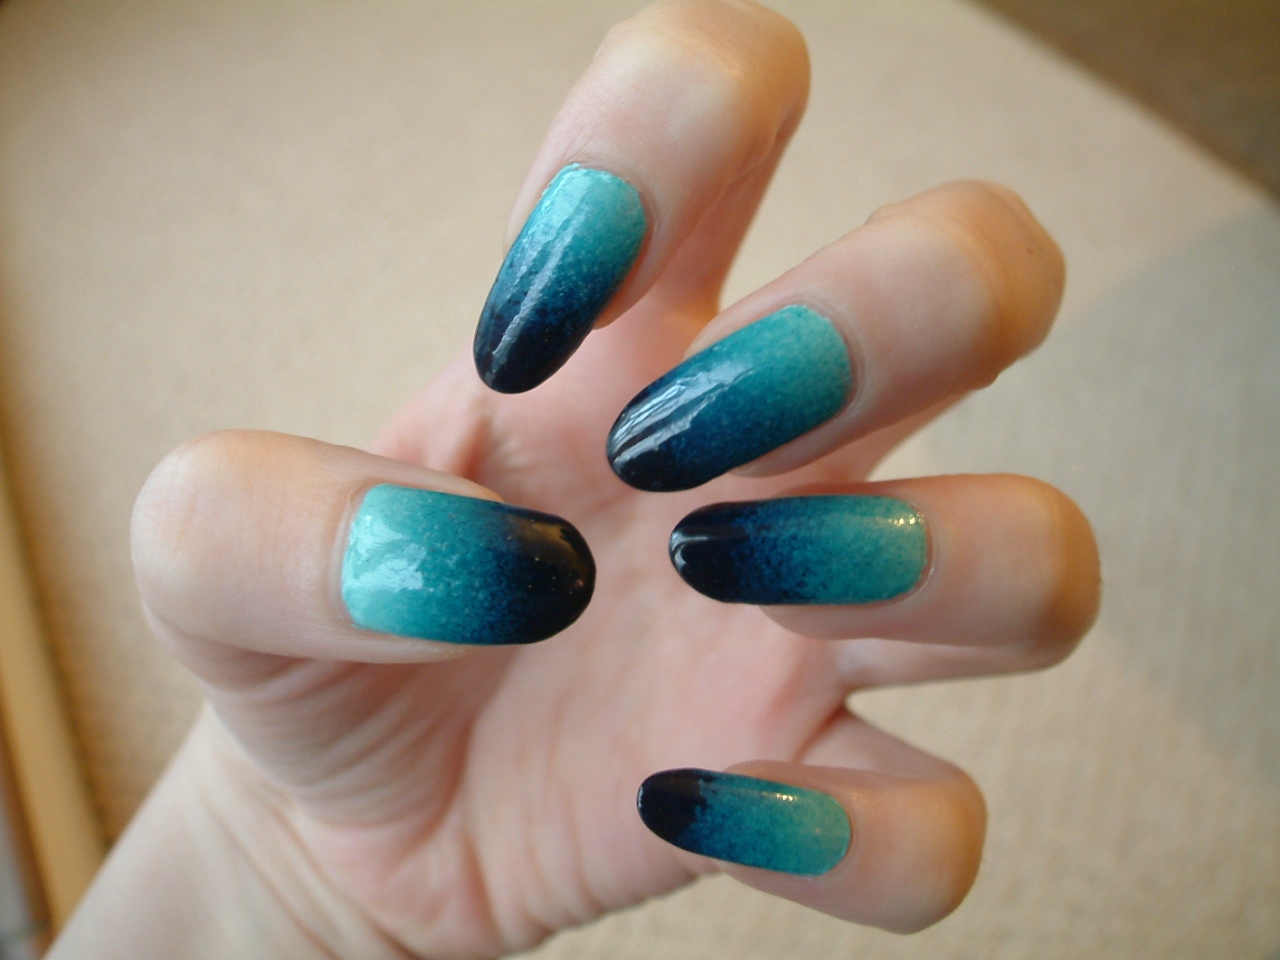 1. Emerald Green Ombre Nails - wide 3